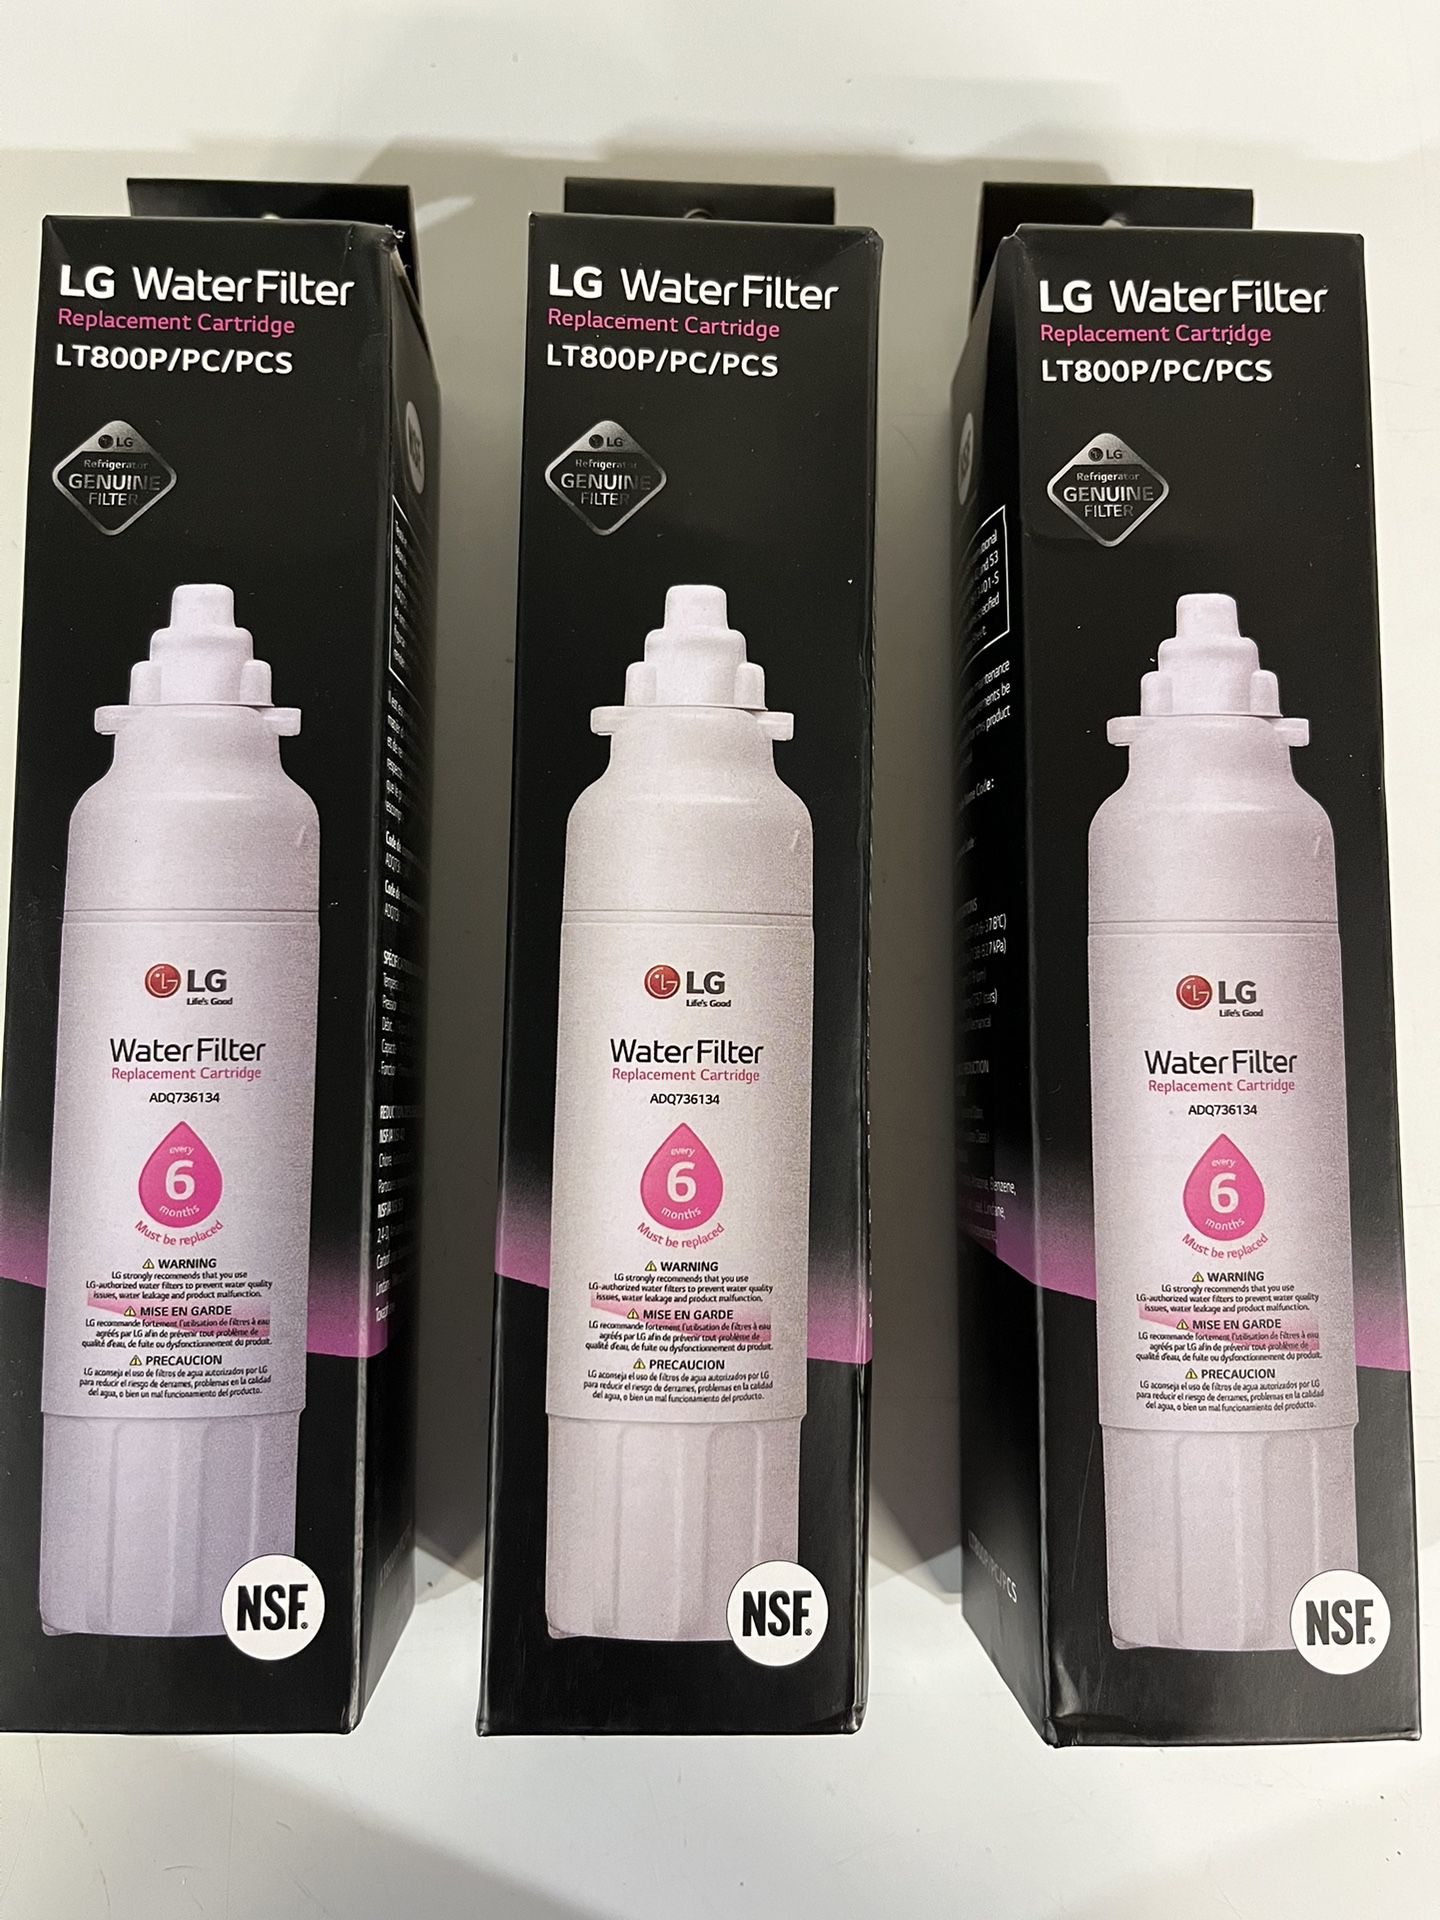 LG Water Filter Replacements